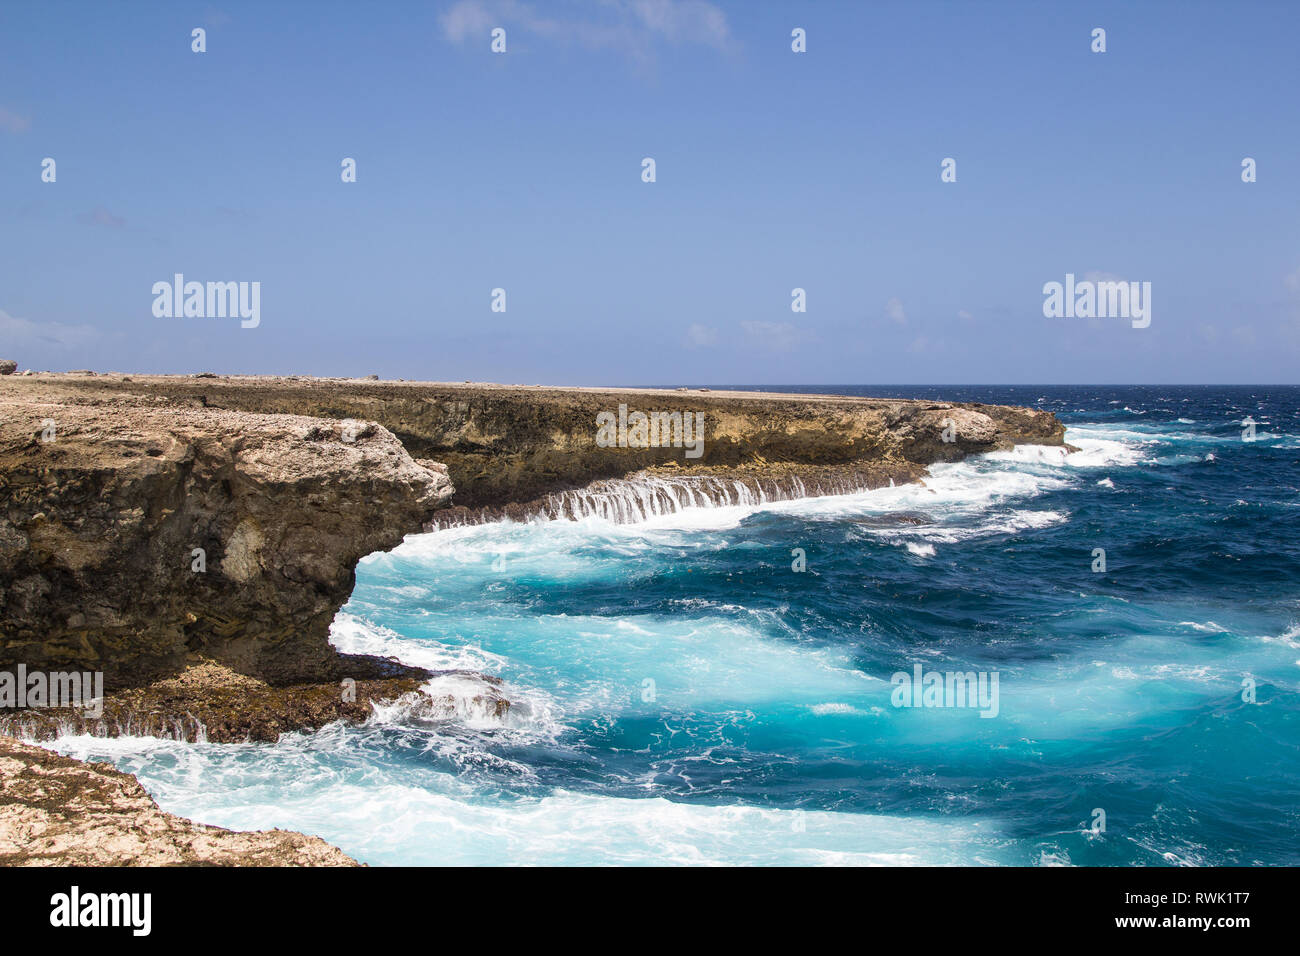 Wild and high waves breaking at the rough vulcanic rocks of the east coast of the tropical island of Bonaire Stock Photo